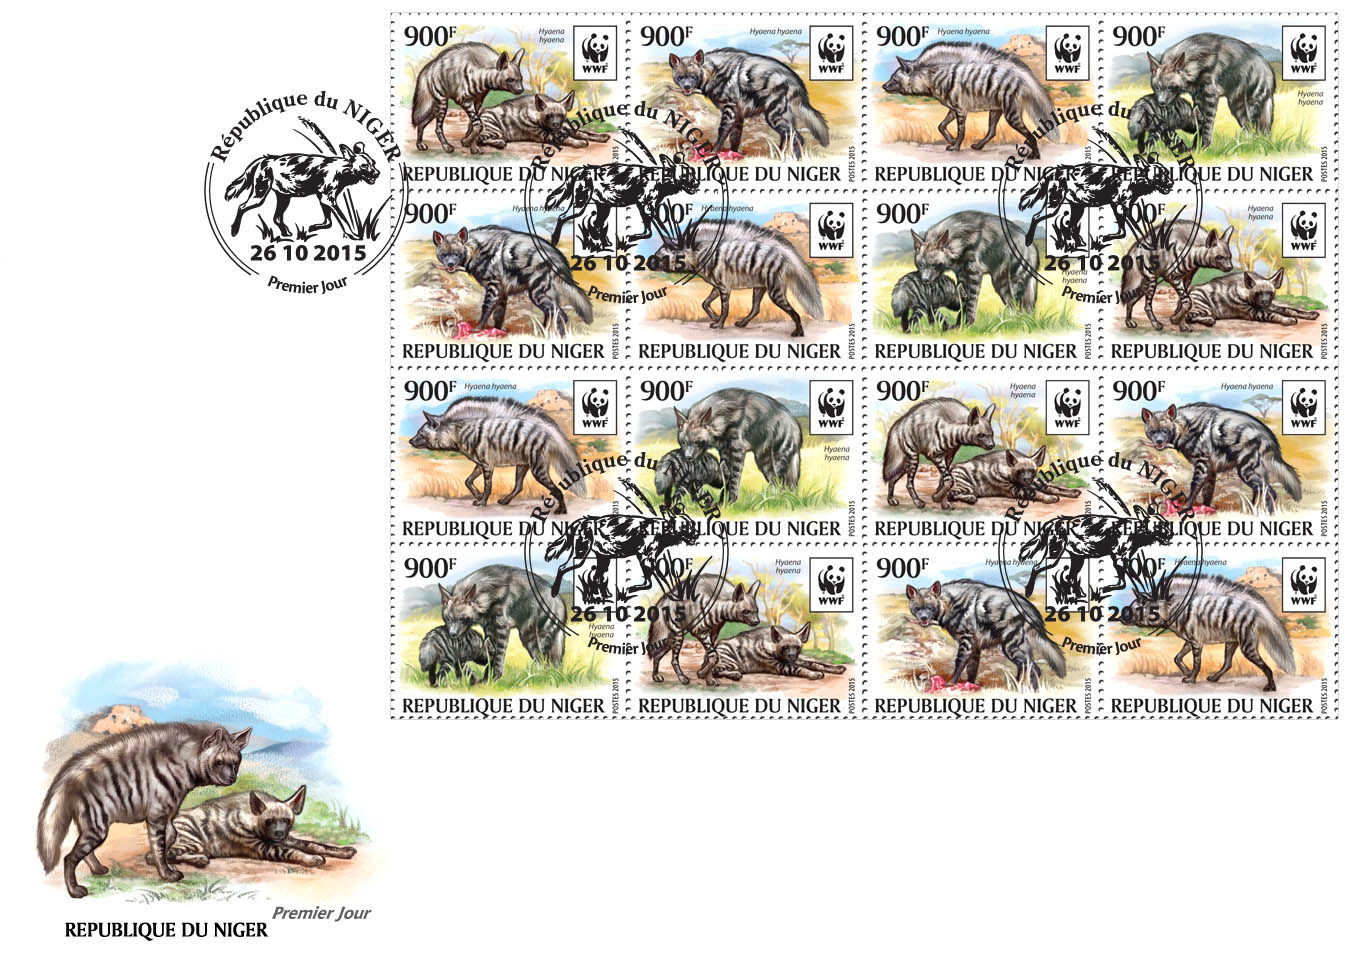 WWF – Hyena (FDC) - Issue of Niger postage stamps